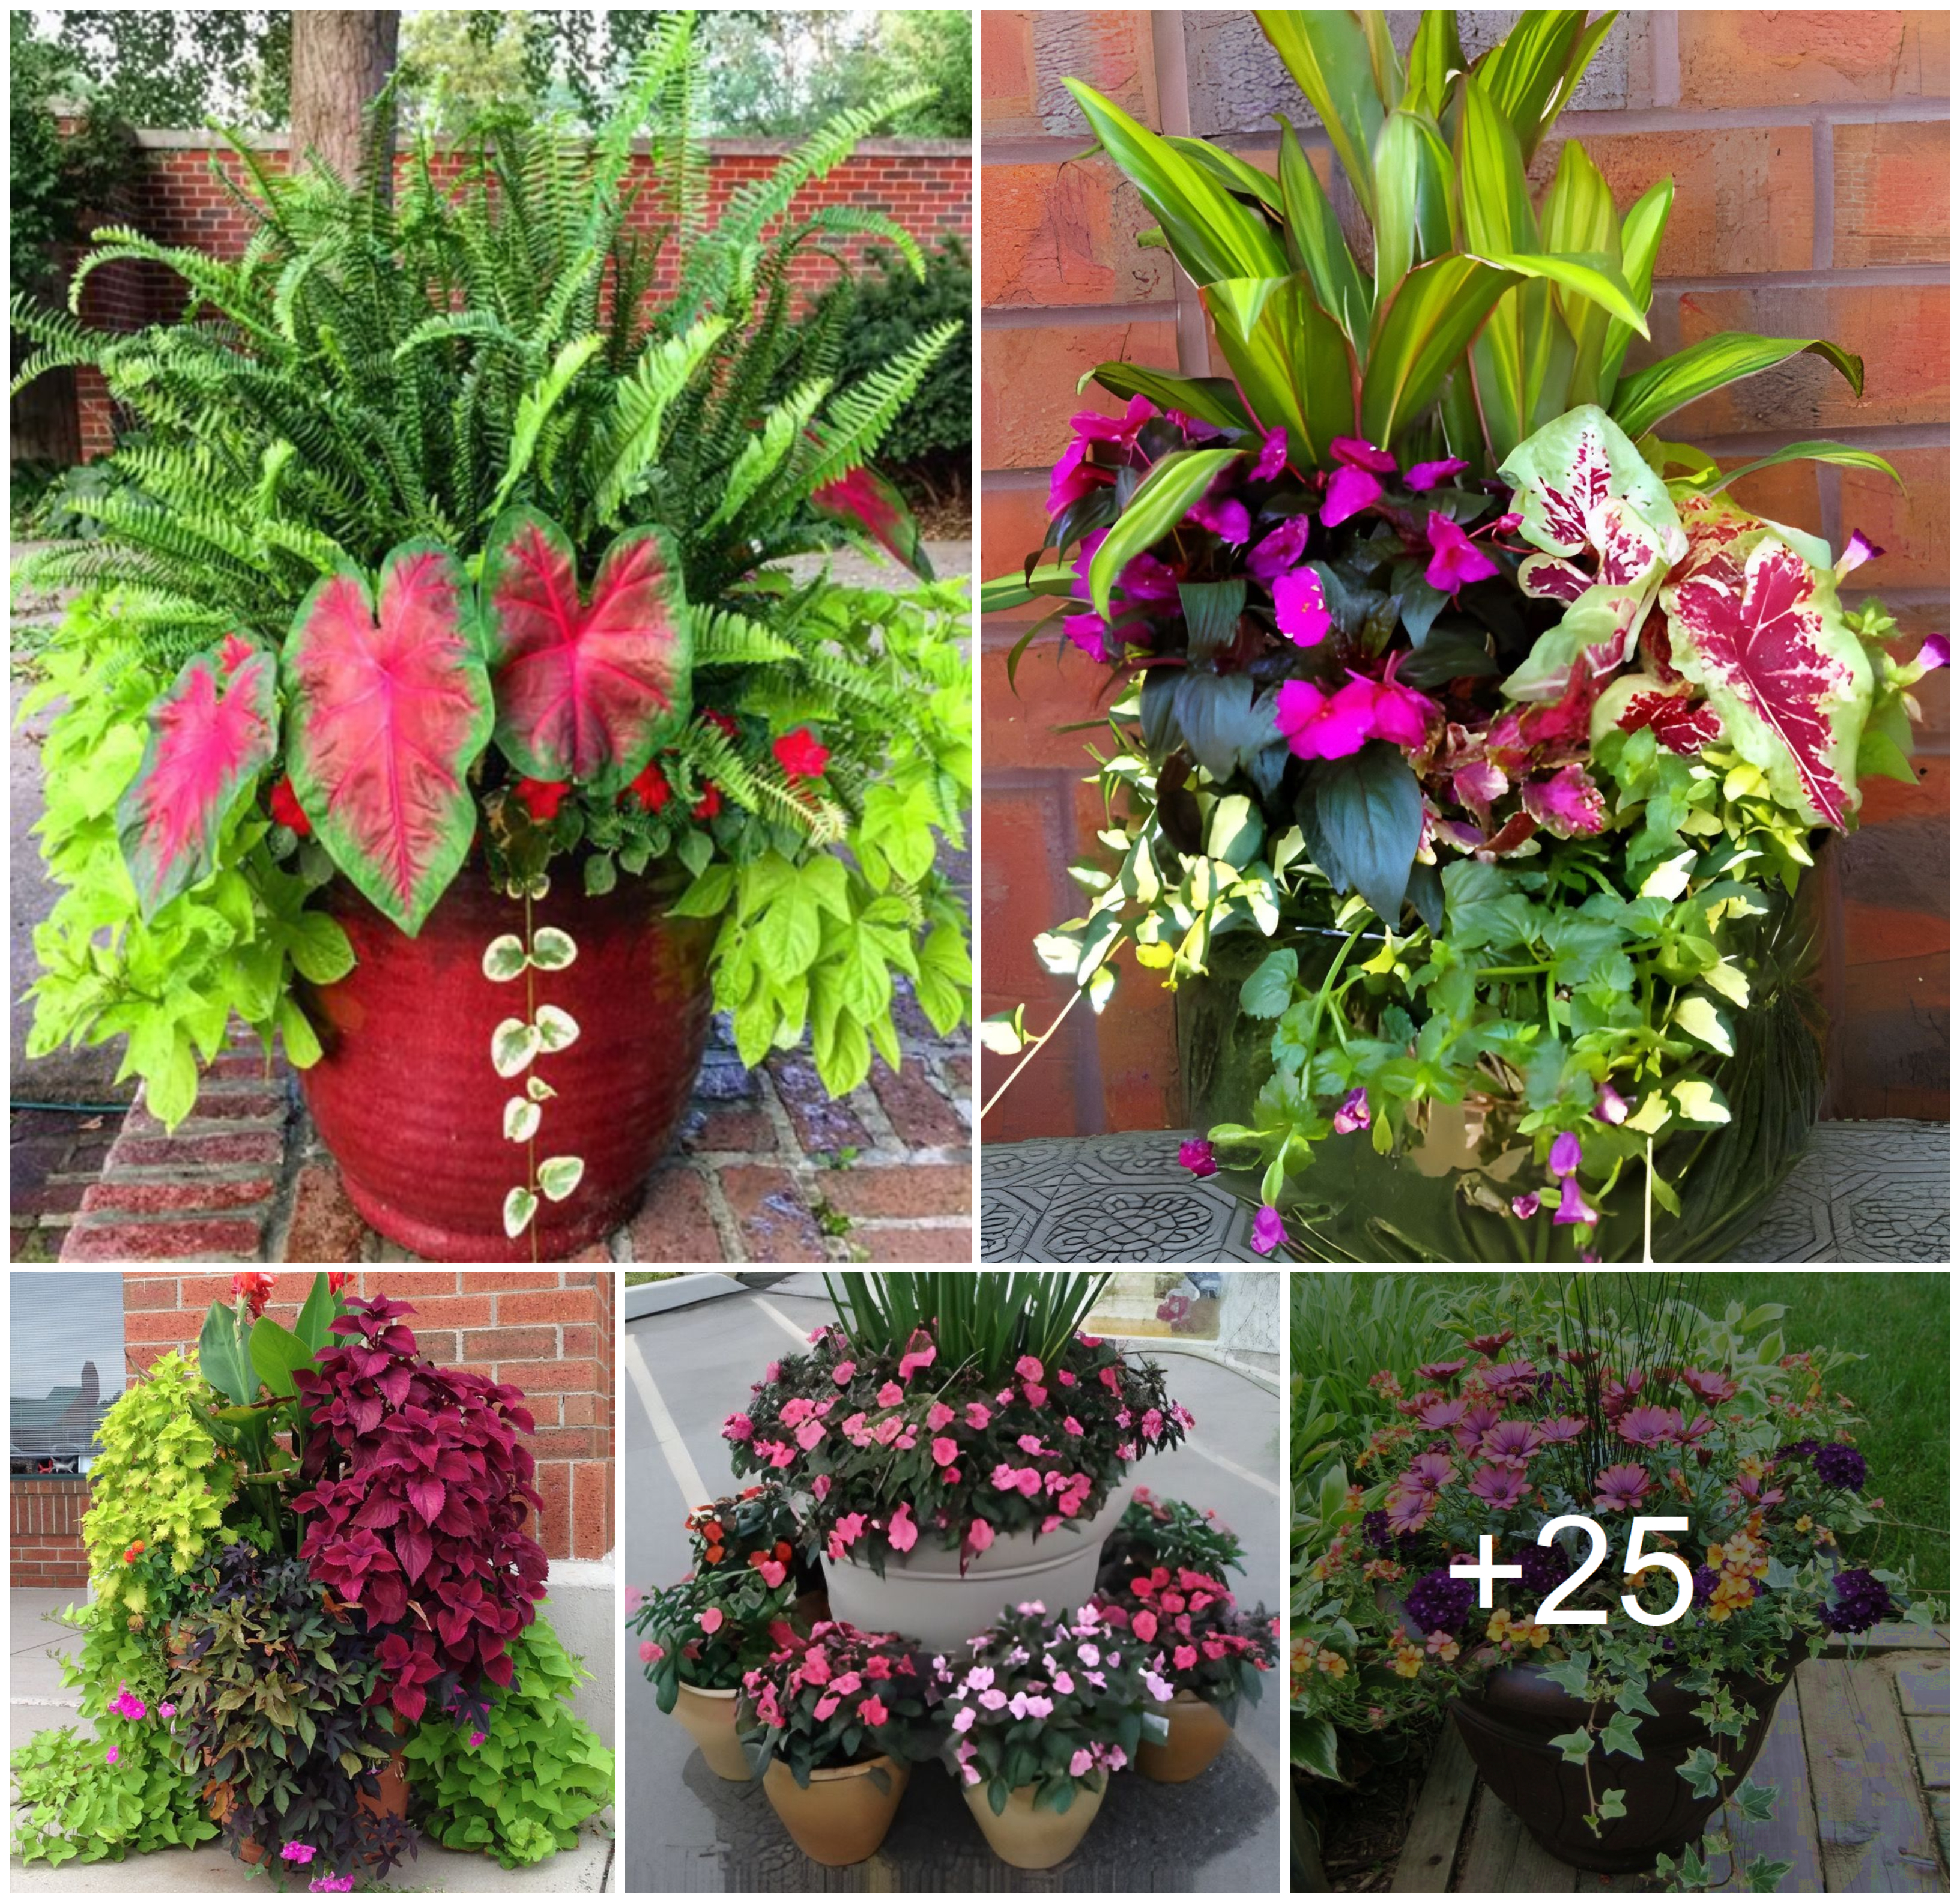 Amazing pot designs and garden decors for this spring